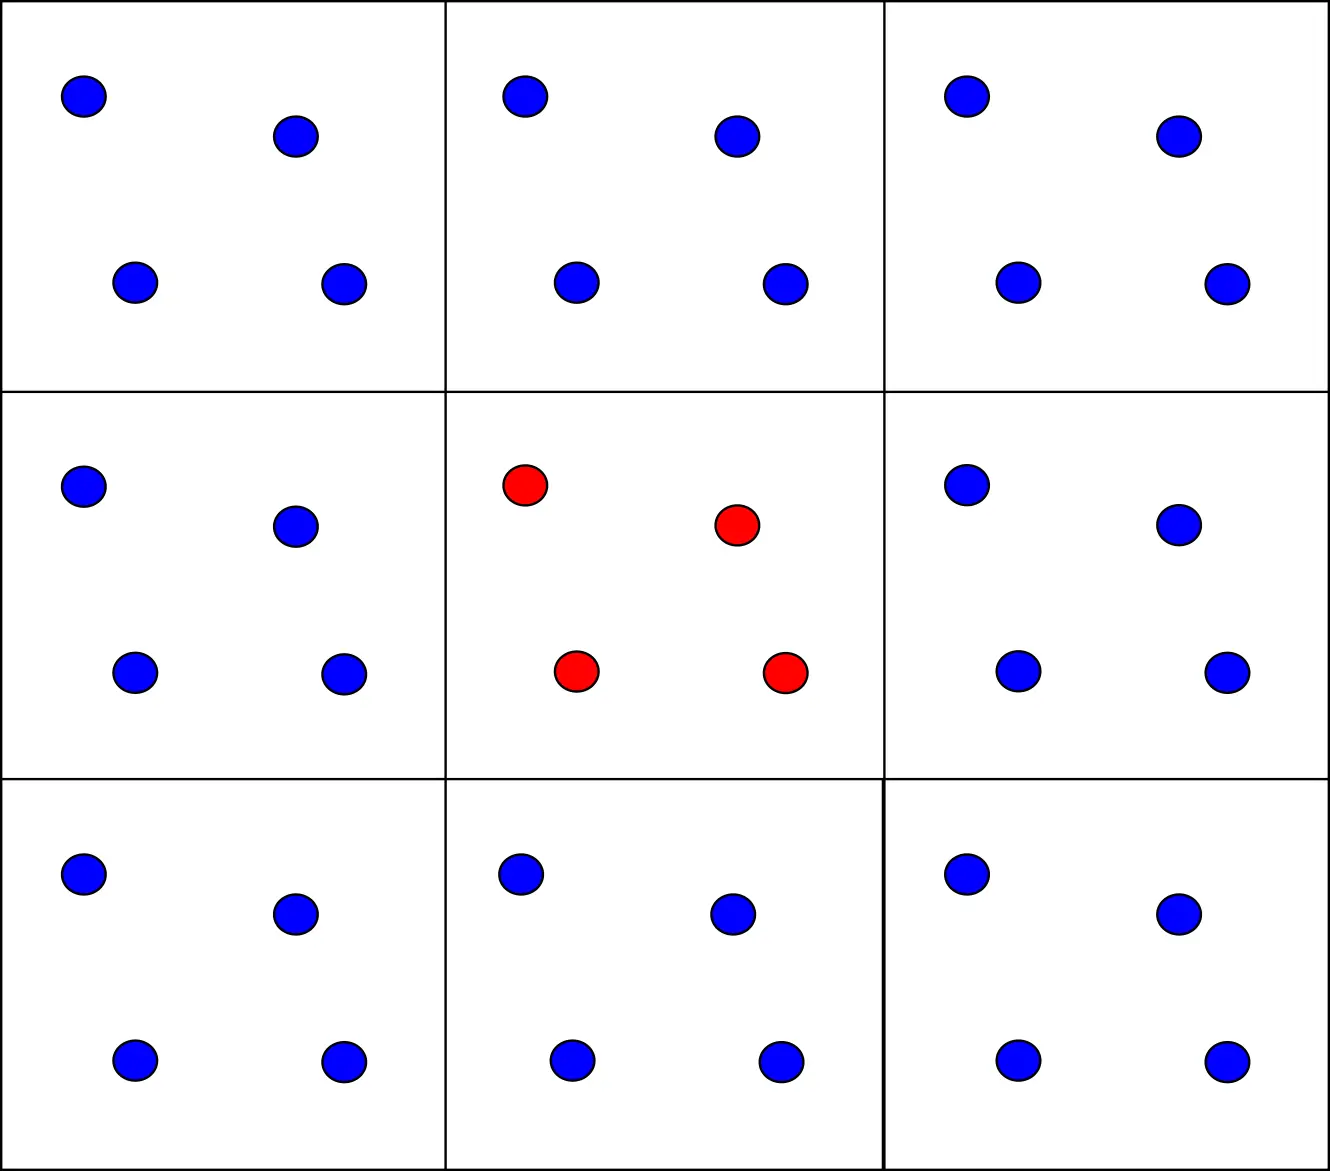 Box replicated in each direction to implement periodic boundary conditions